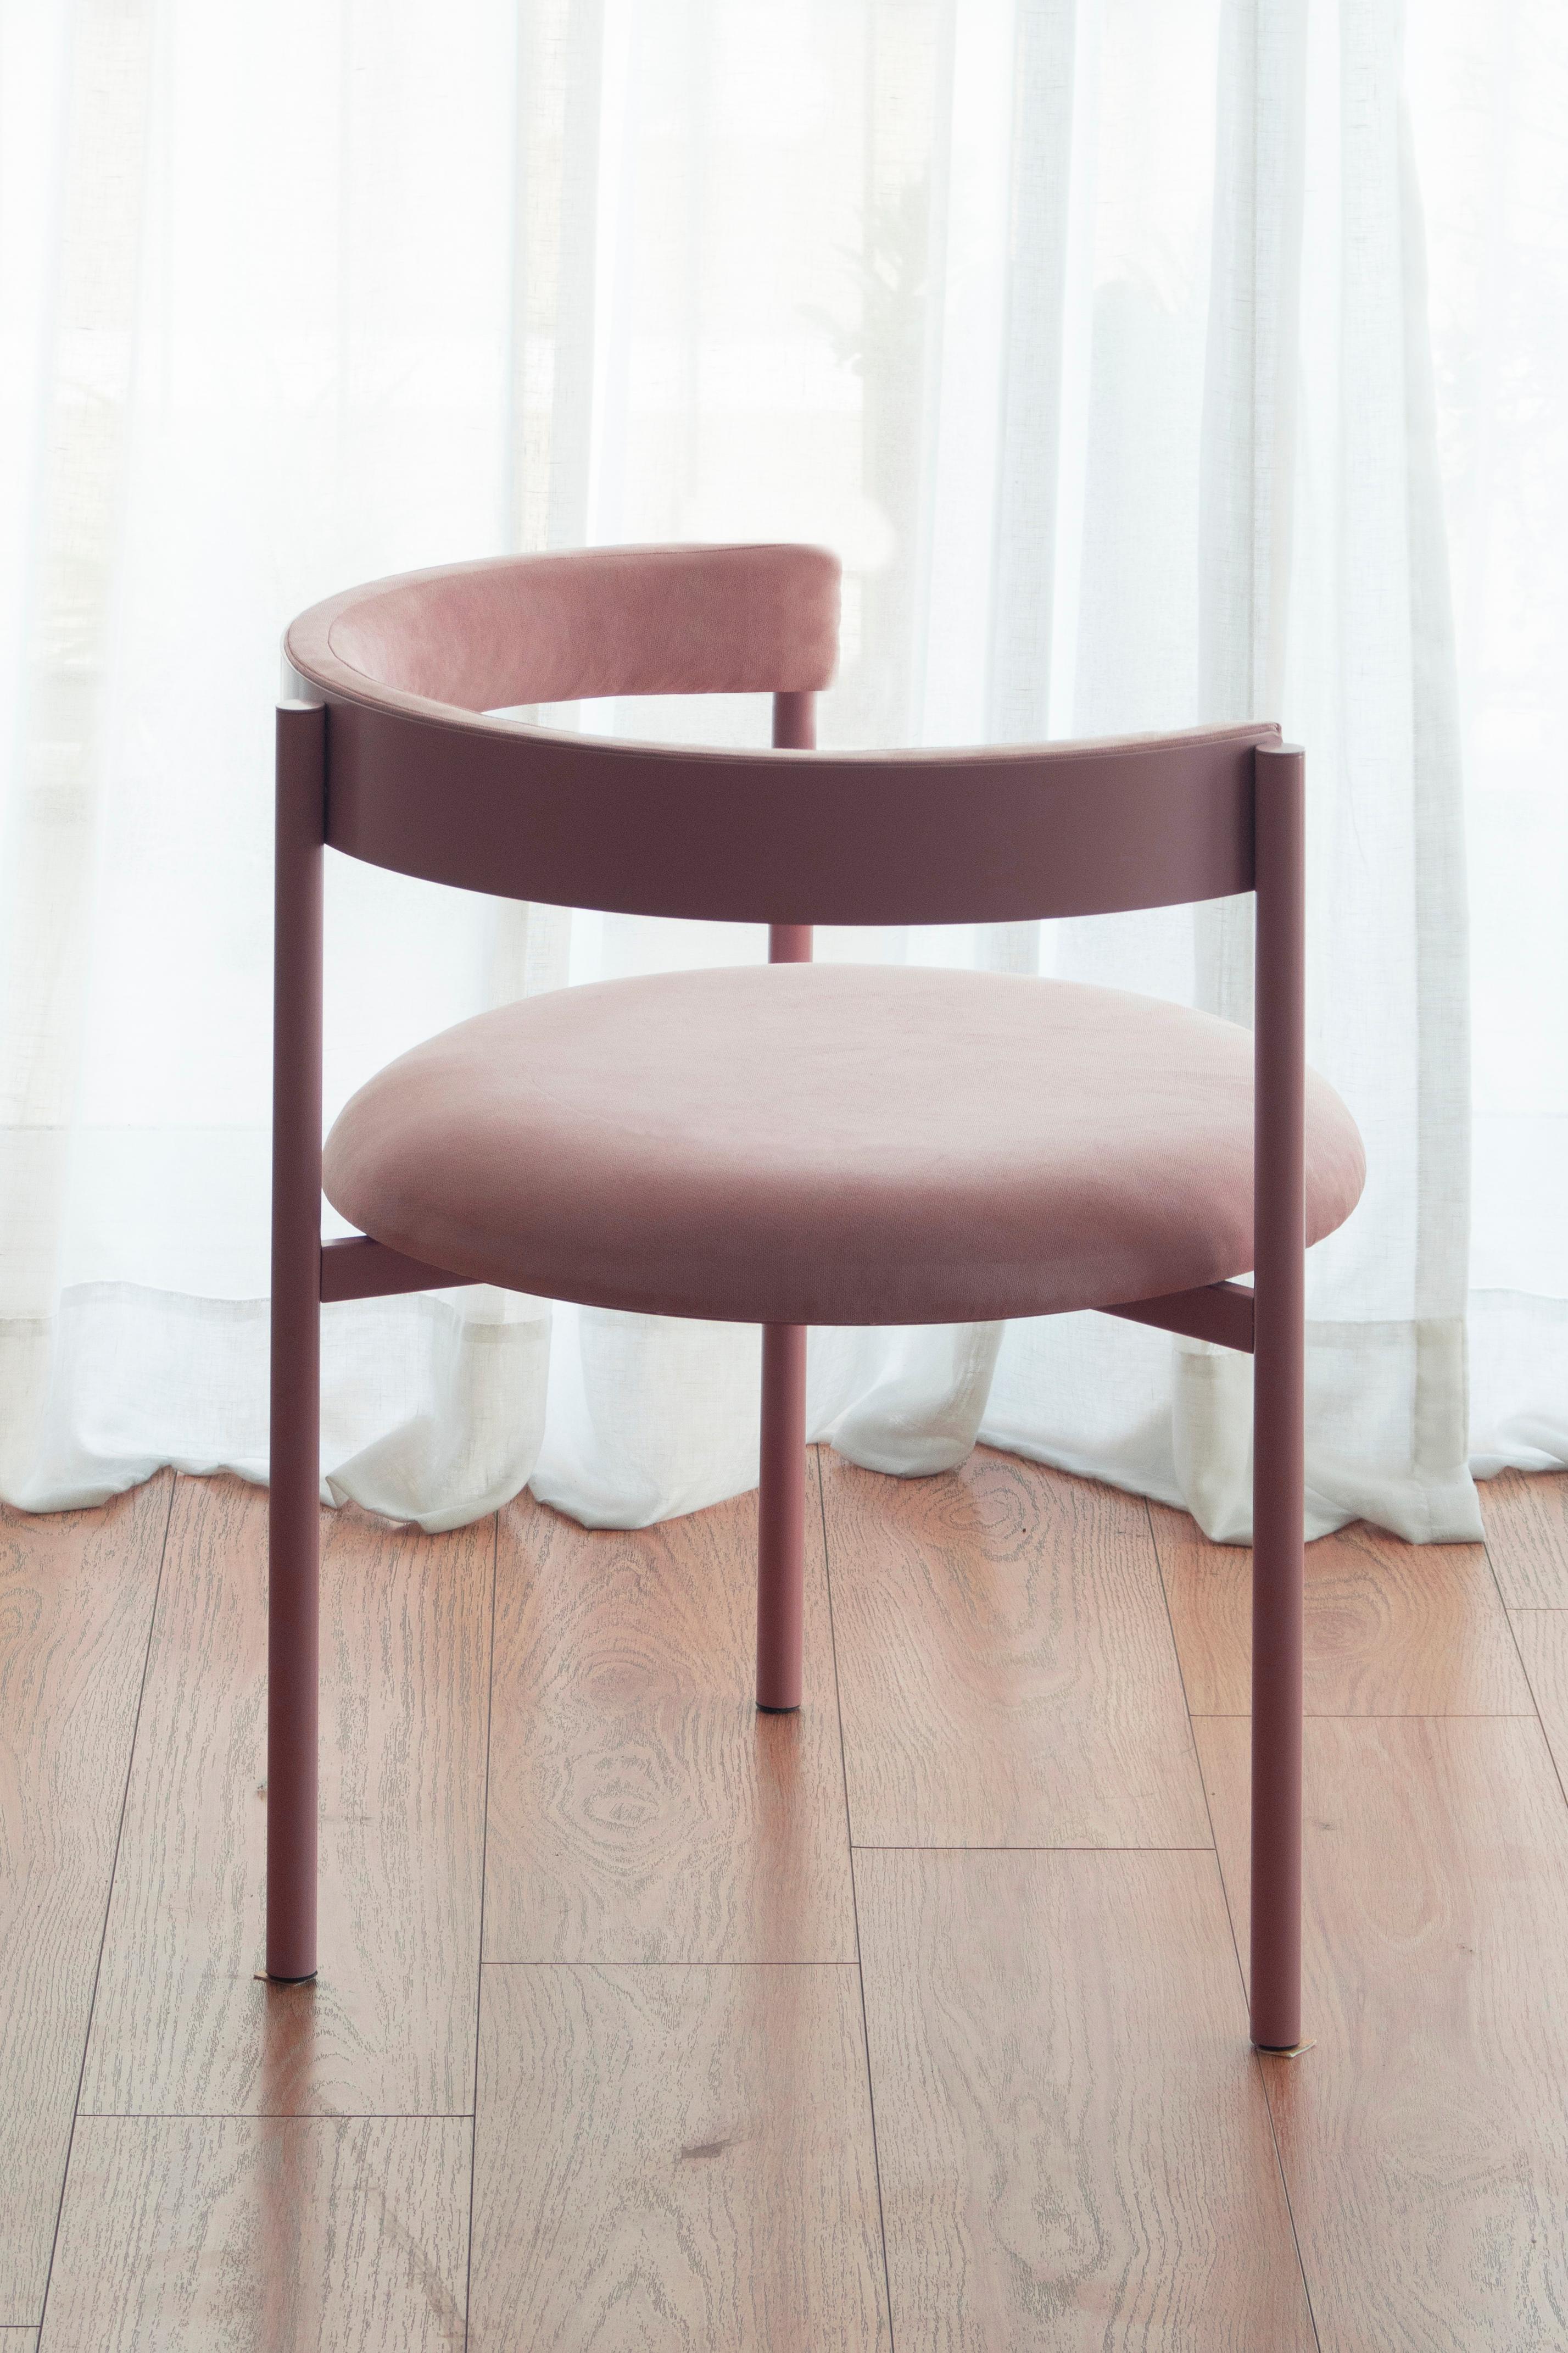 Aro chair, Pink by Ries
Dimensions: W60 x D60 x H67,5 cm 
Materials: Round steel tube, high-density foam, and velvet upholstery.

Also available: Merlot,black, yellow, mika, oceano, and dark blue.

Ries is a design studio based in Buenos